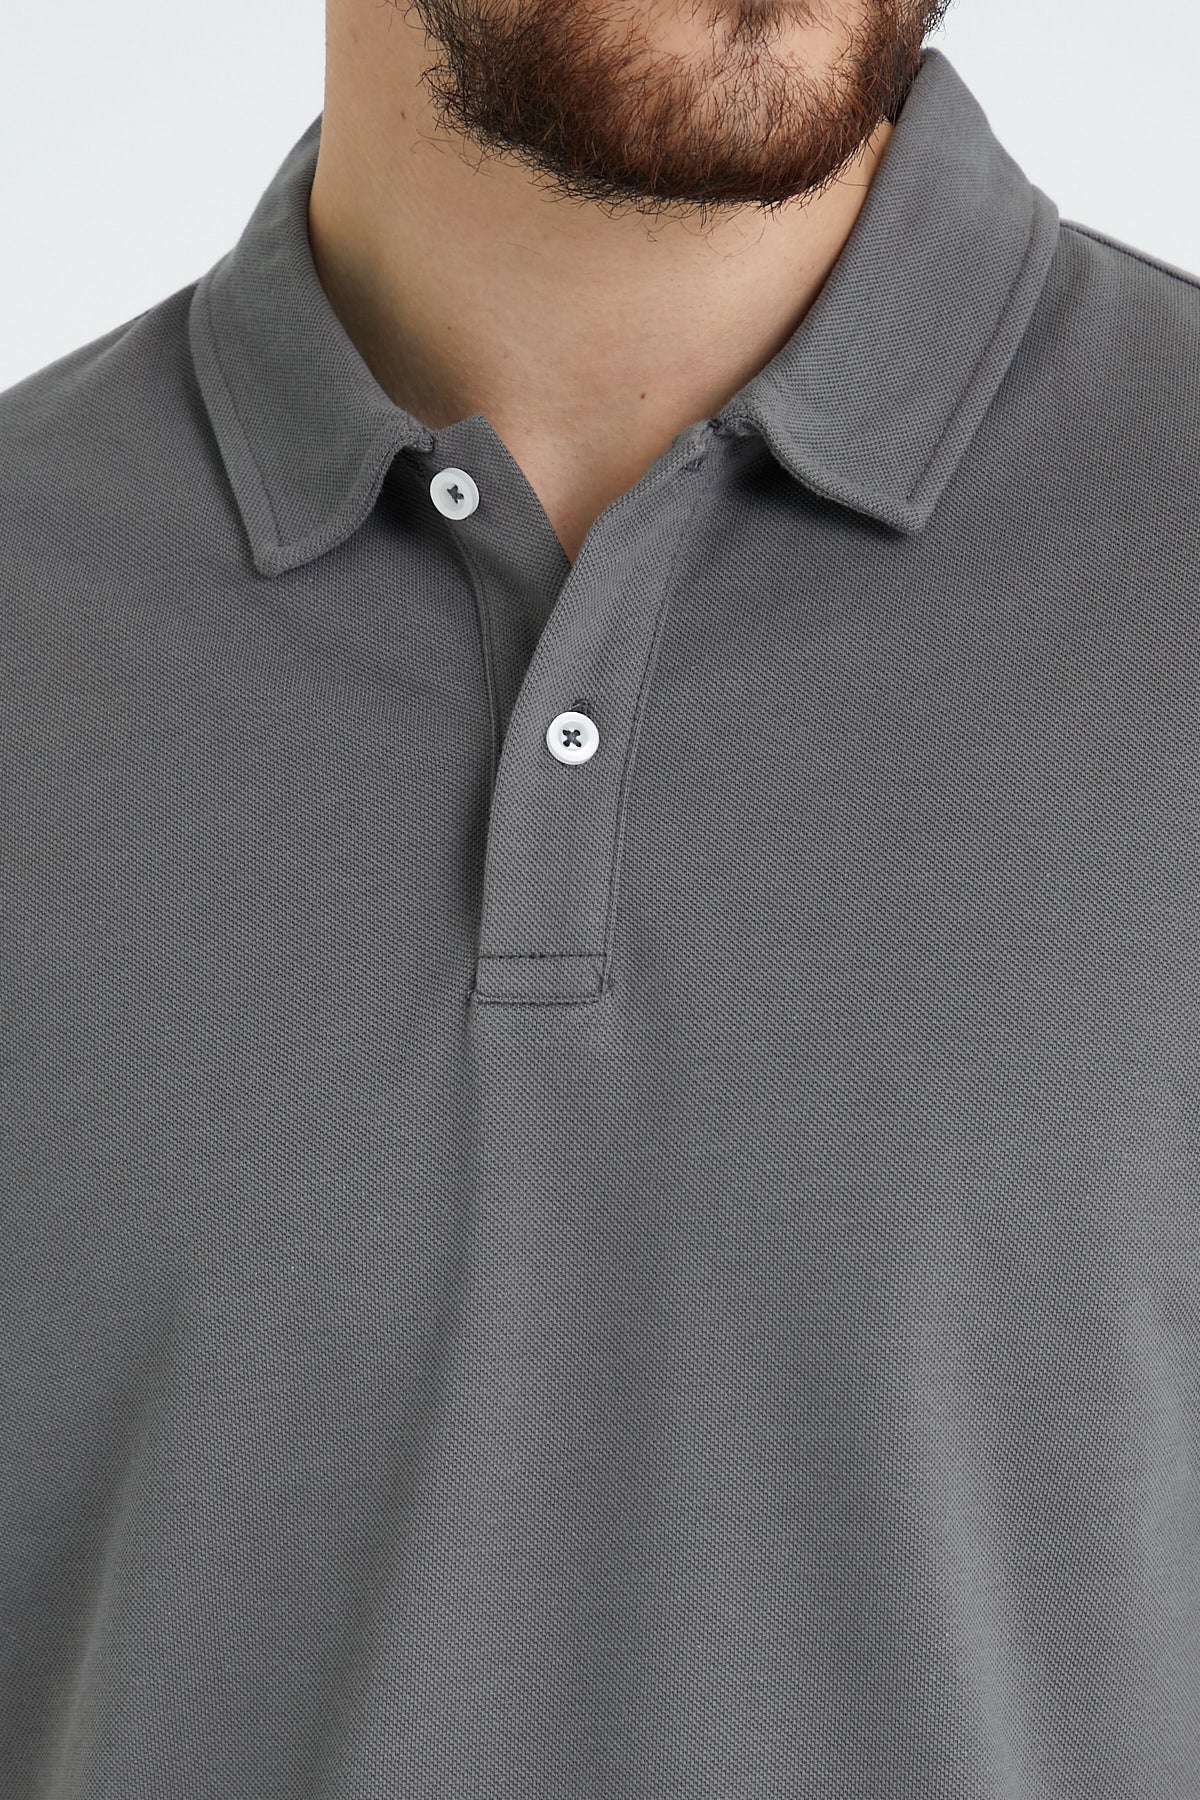 Men’s Classic Polo Shirts - 2 Button Polo Shirt Many Color Available - Wear Sierra